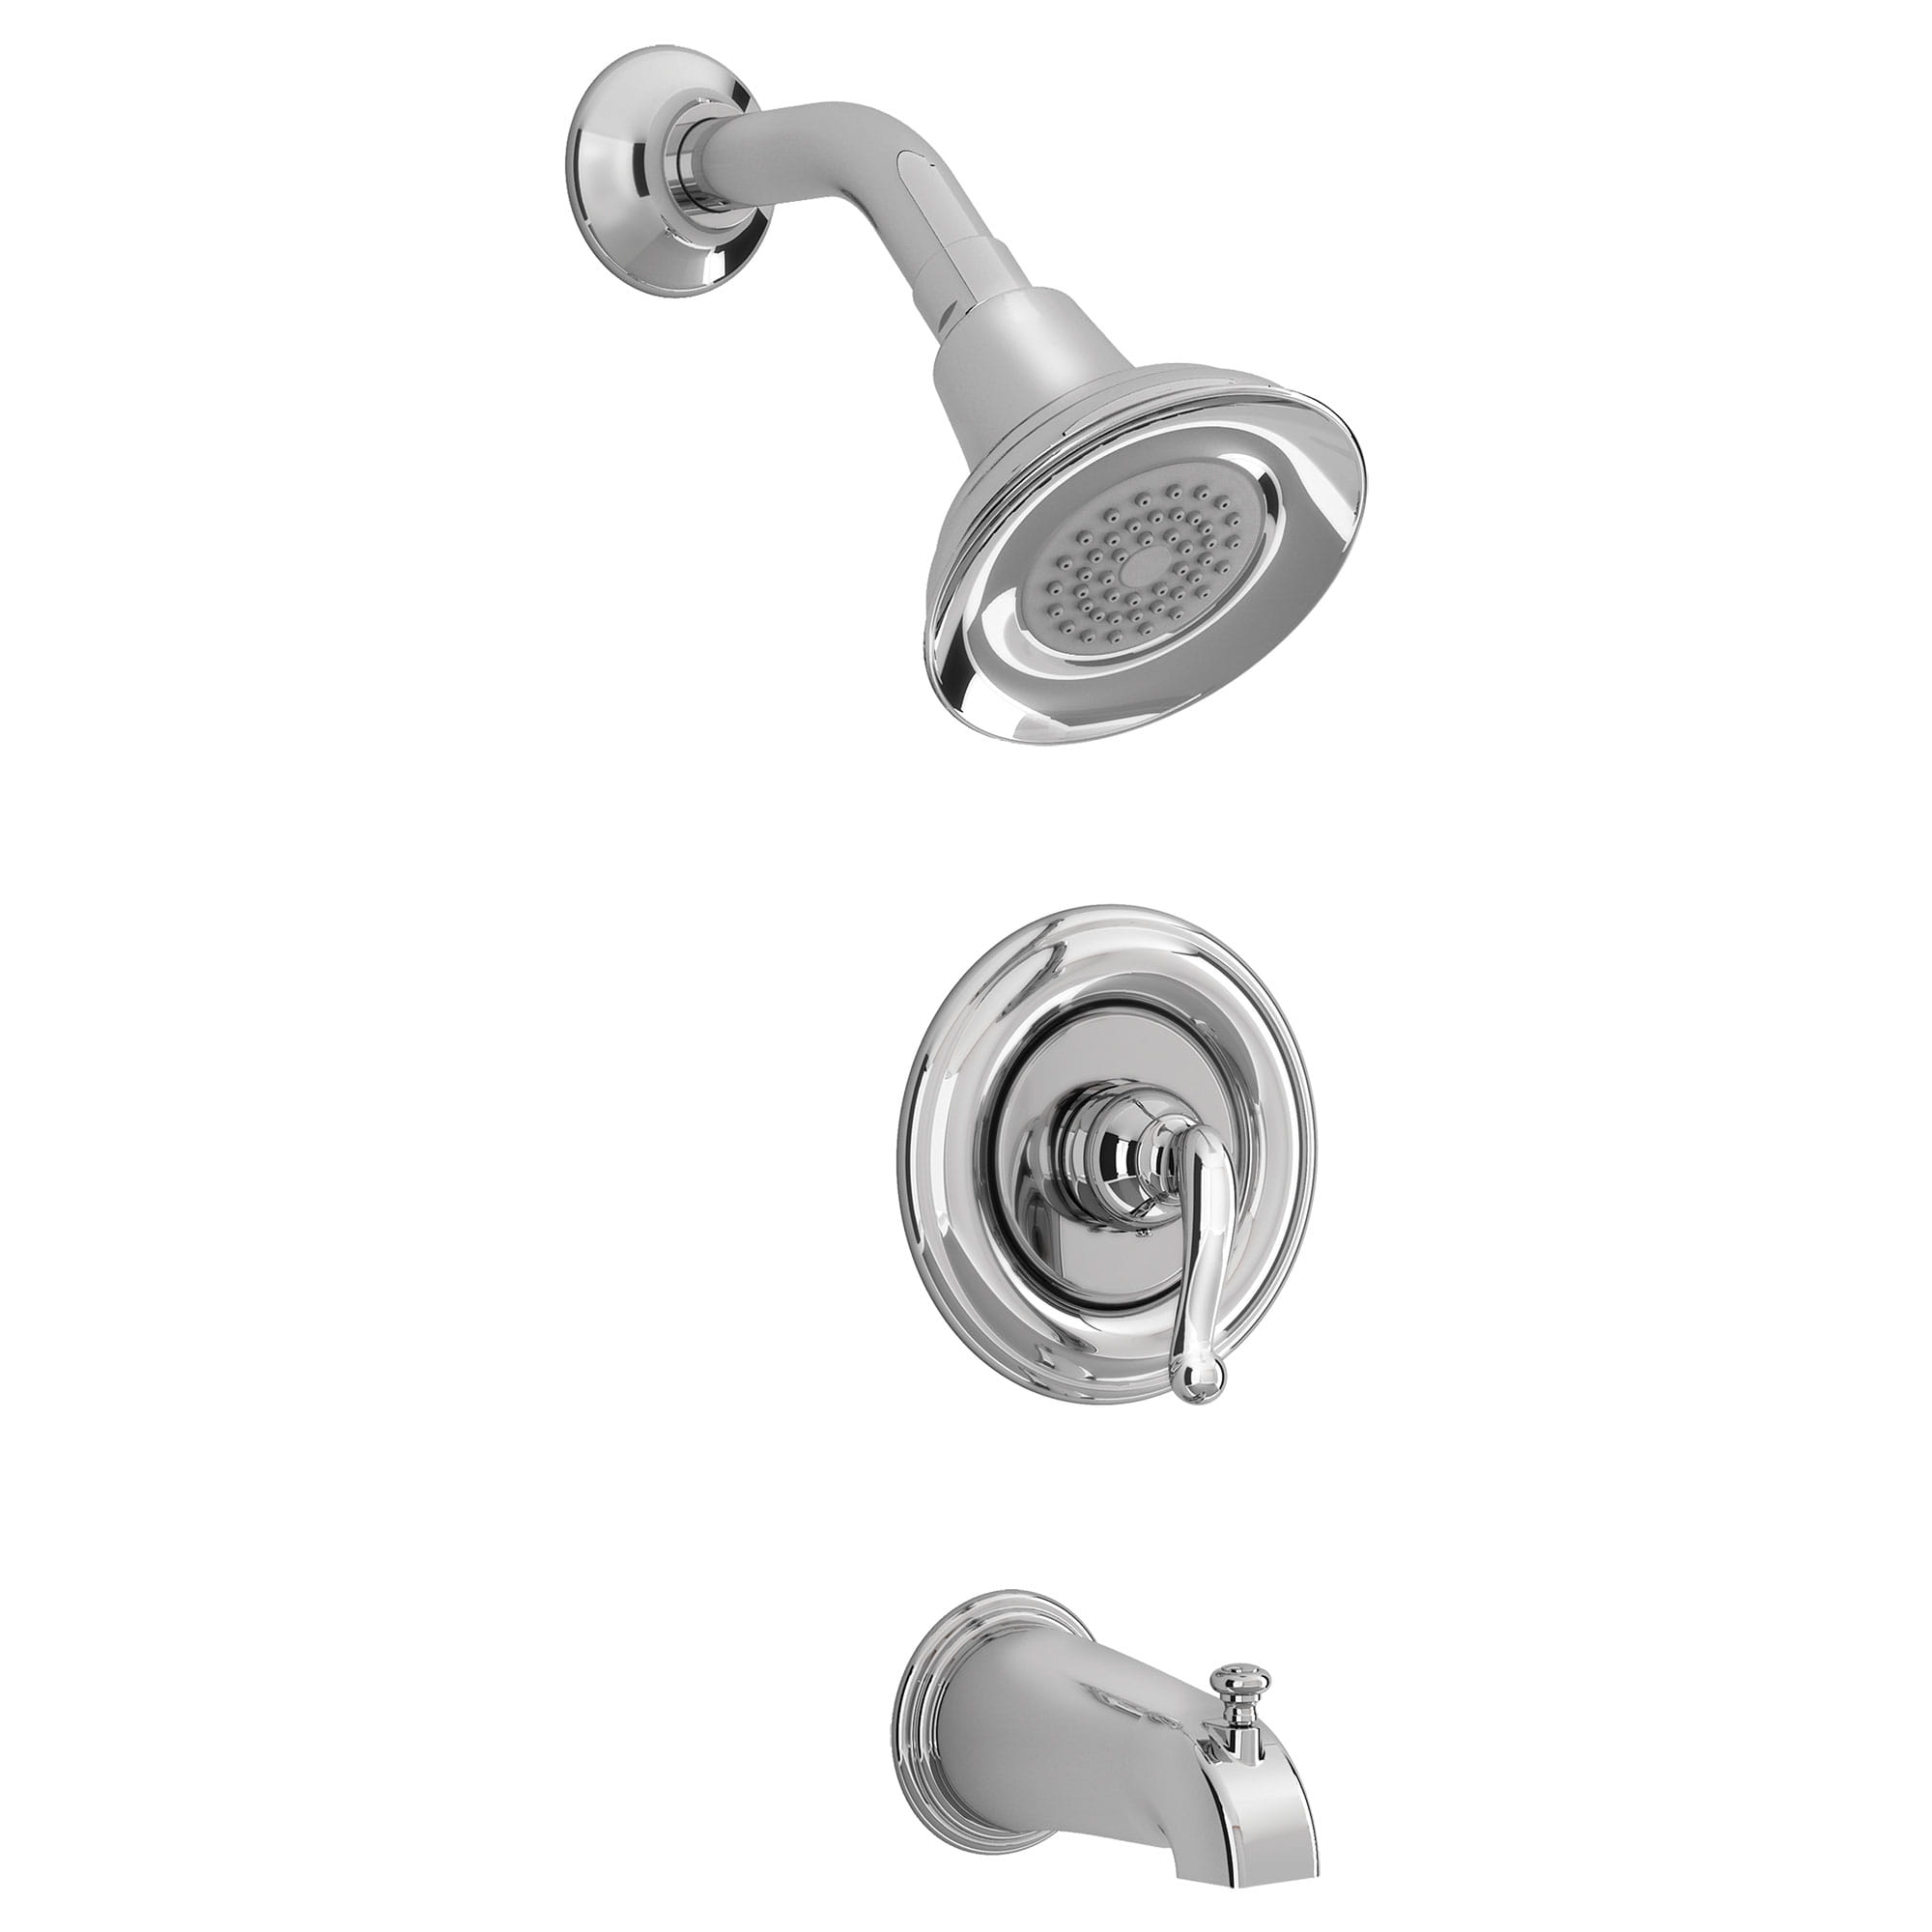 Winthrop 25 GPM Tub and Shower Trim Kit with Pressure Balance Valve Cartridge and Lever Handles CHROME